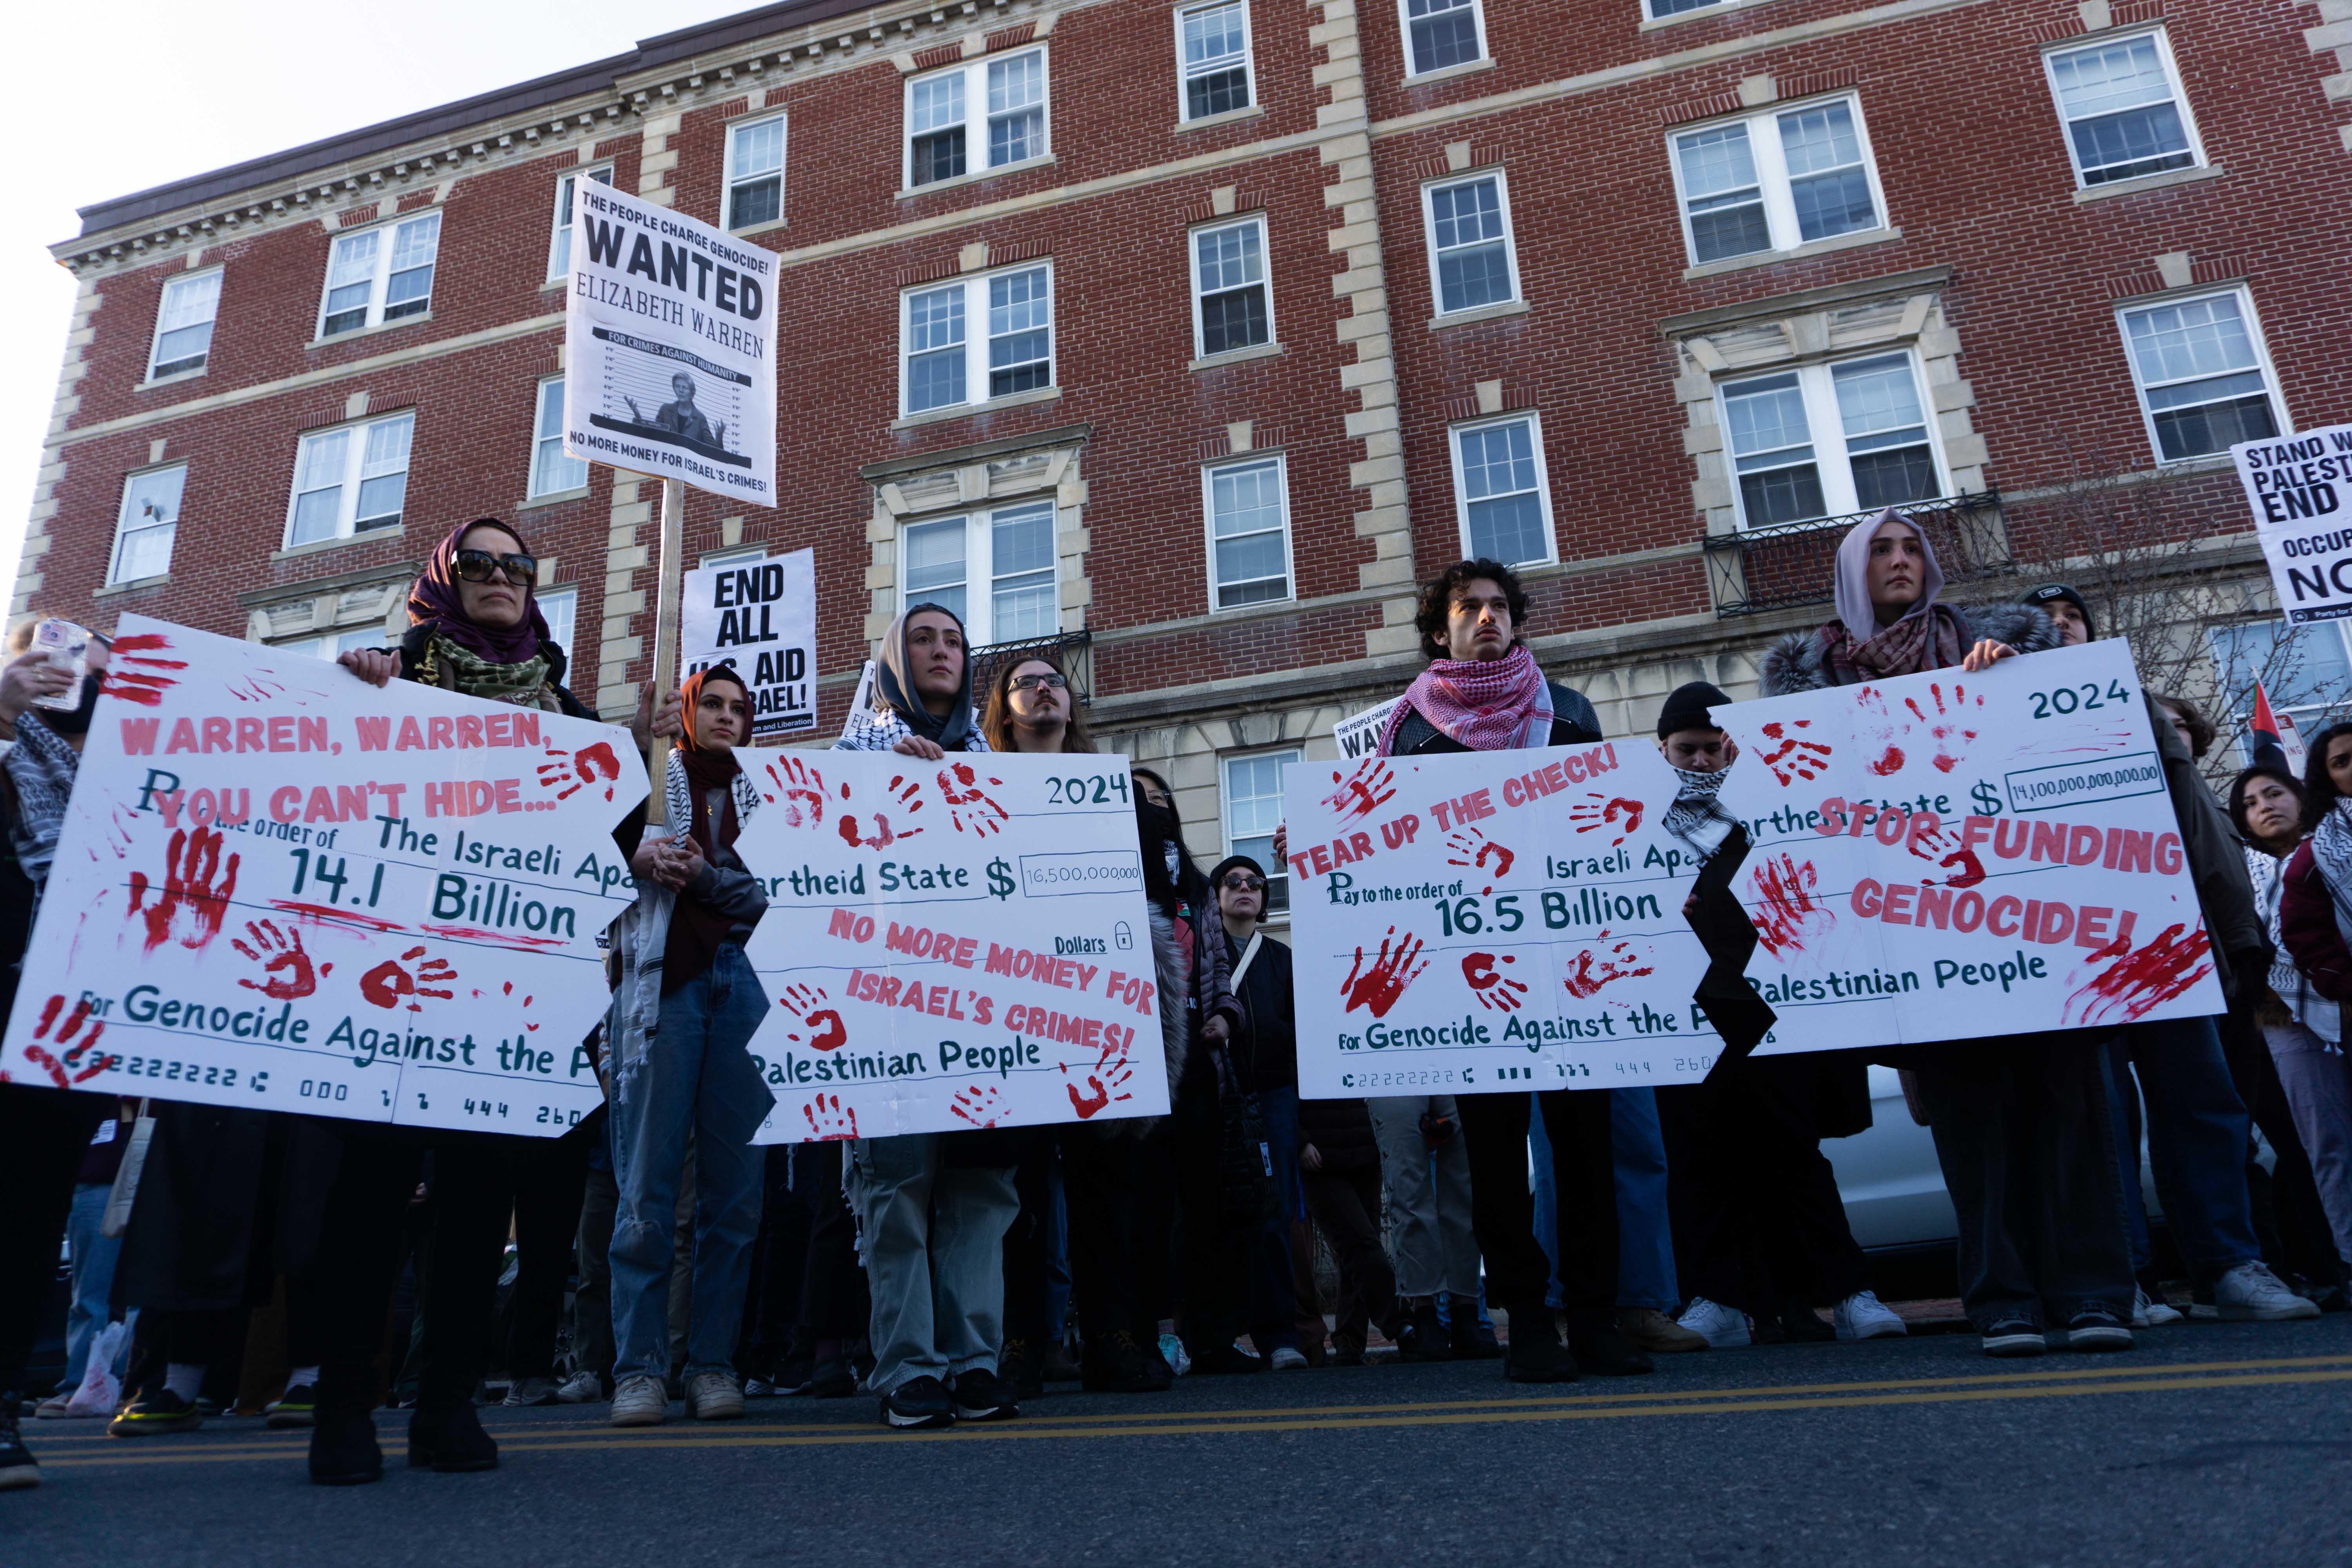 Protesters hold posters drawn as checks made out to “The Israeli Apartheid State” for “Genocide Against the Palestinian People” during a pro-Palestine rally. More than 200 people marched from Cambridge Common to the home of U.S. Sen. Elizabeth Warren (D-Mass.), demanding for her to vote against U.S. military aid to Israel.